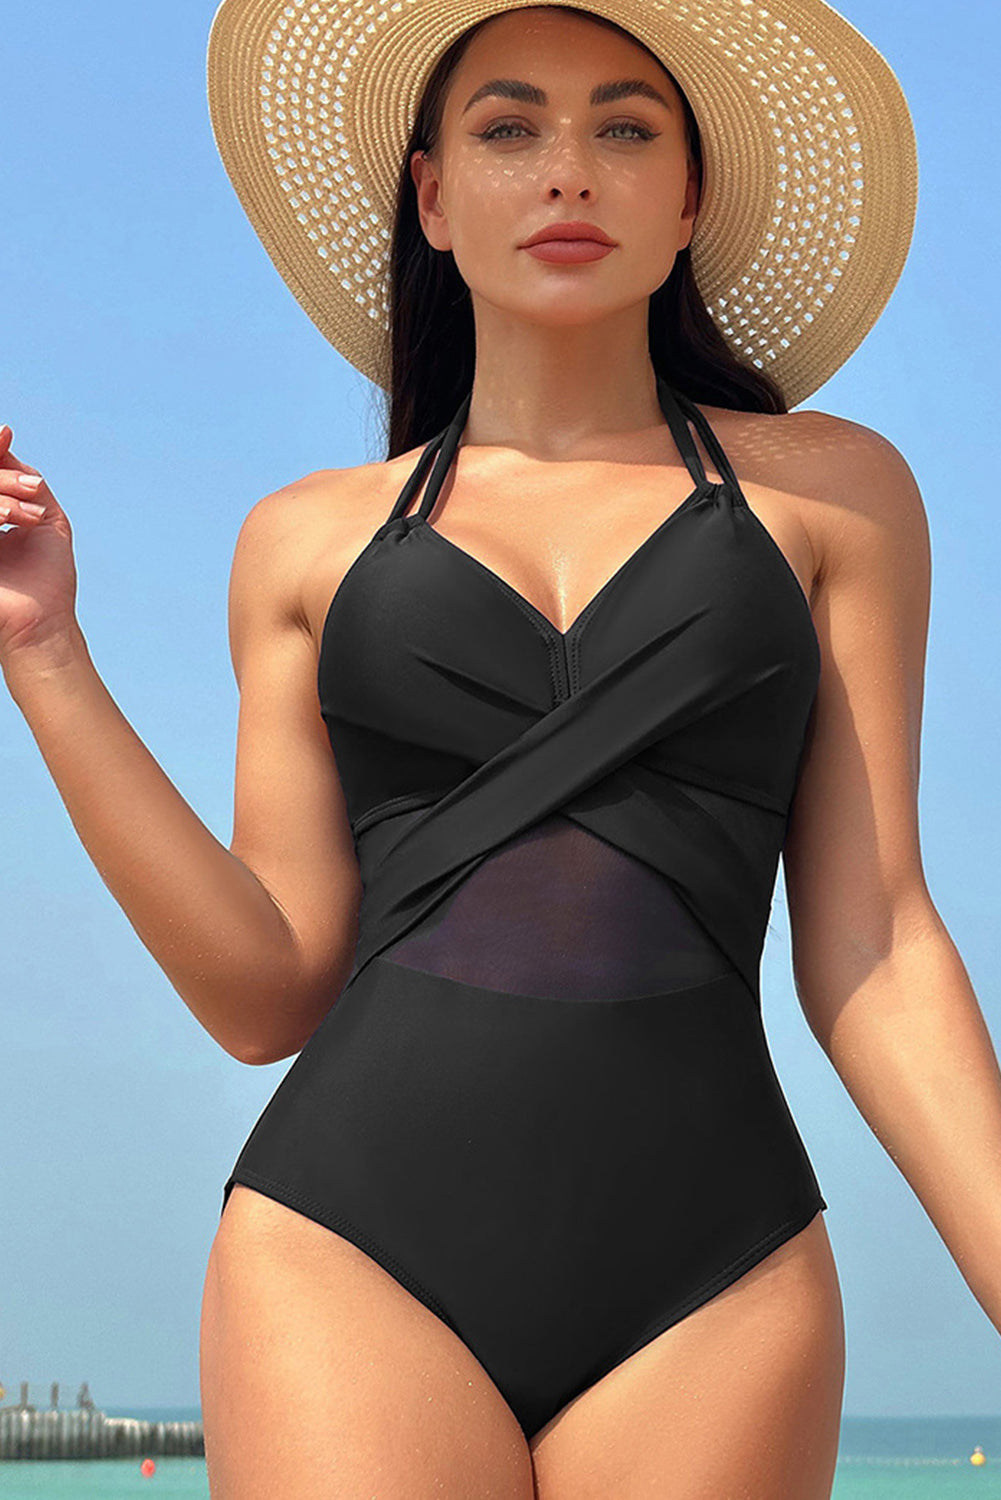 - Black Halter Mesh Cross Front One-Piece Swimsuit - womens one piece swimsuit at TFC&H Co.